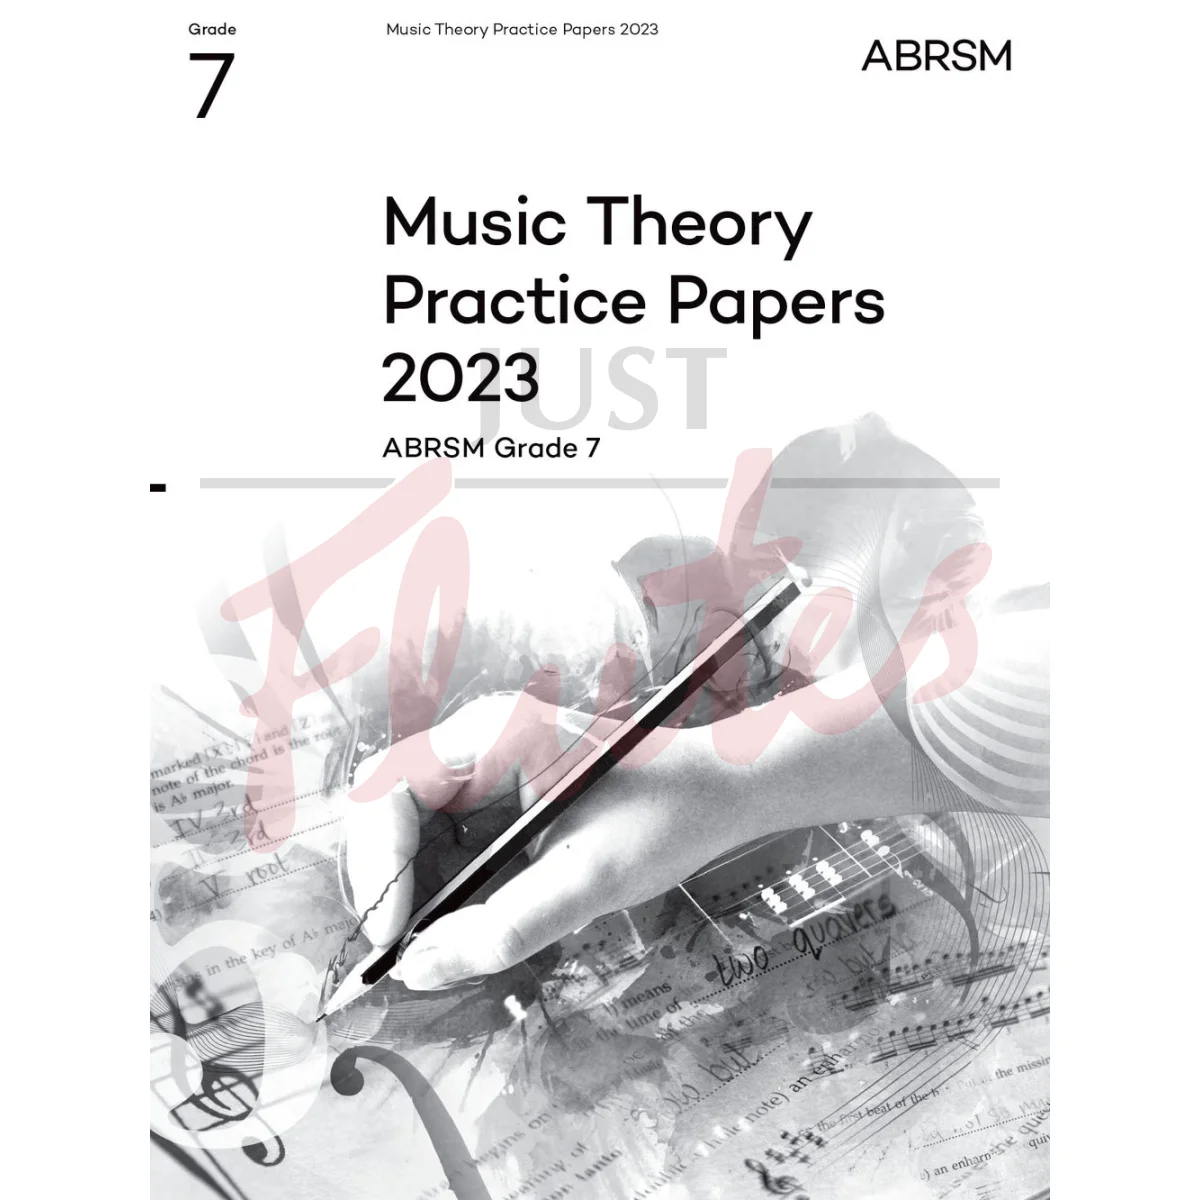 Music Theory Practice Papers 2023 Grade 7